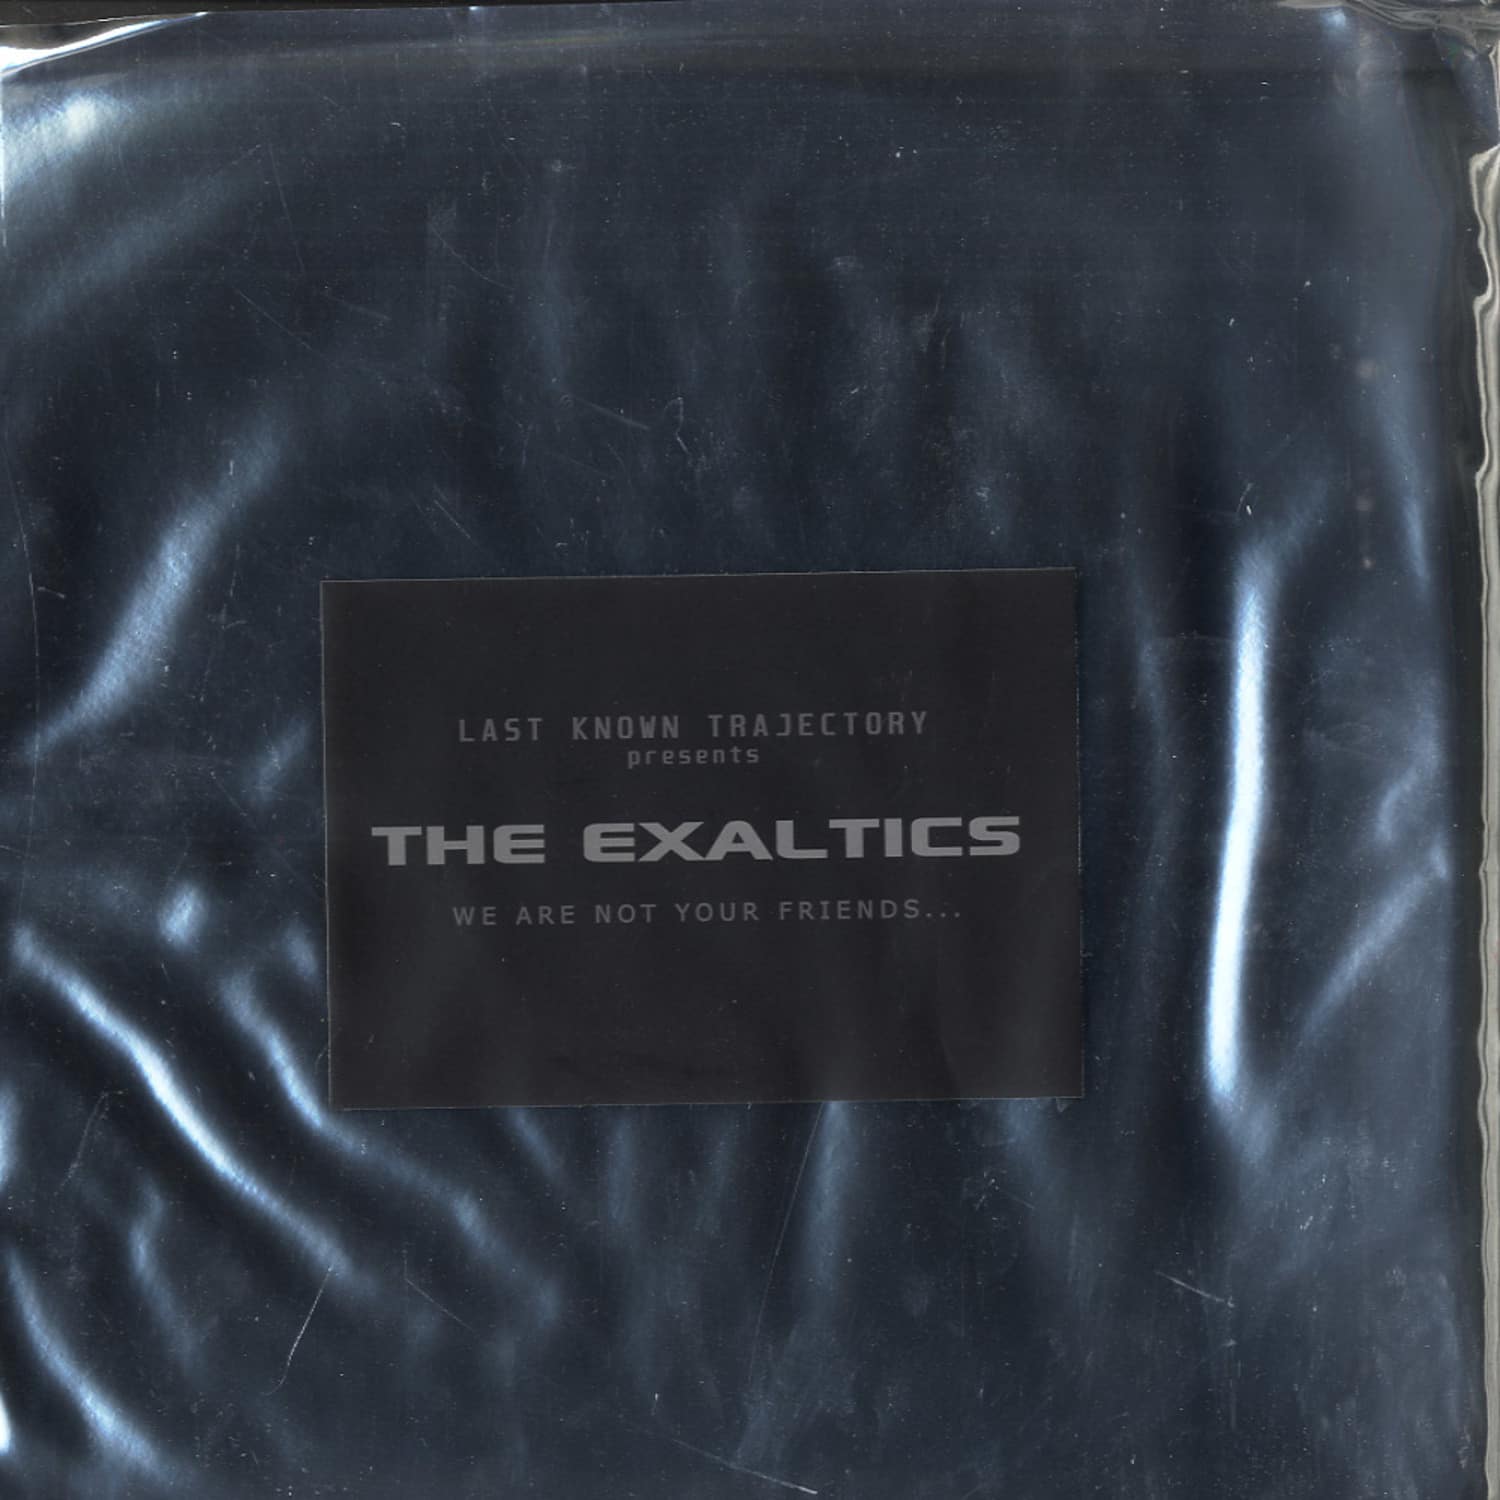 The Excaltics - WE ARE NOT YOUR FRIENDS